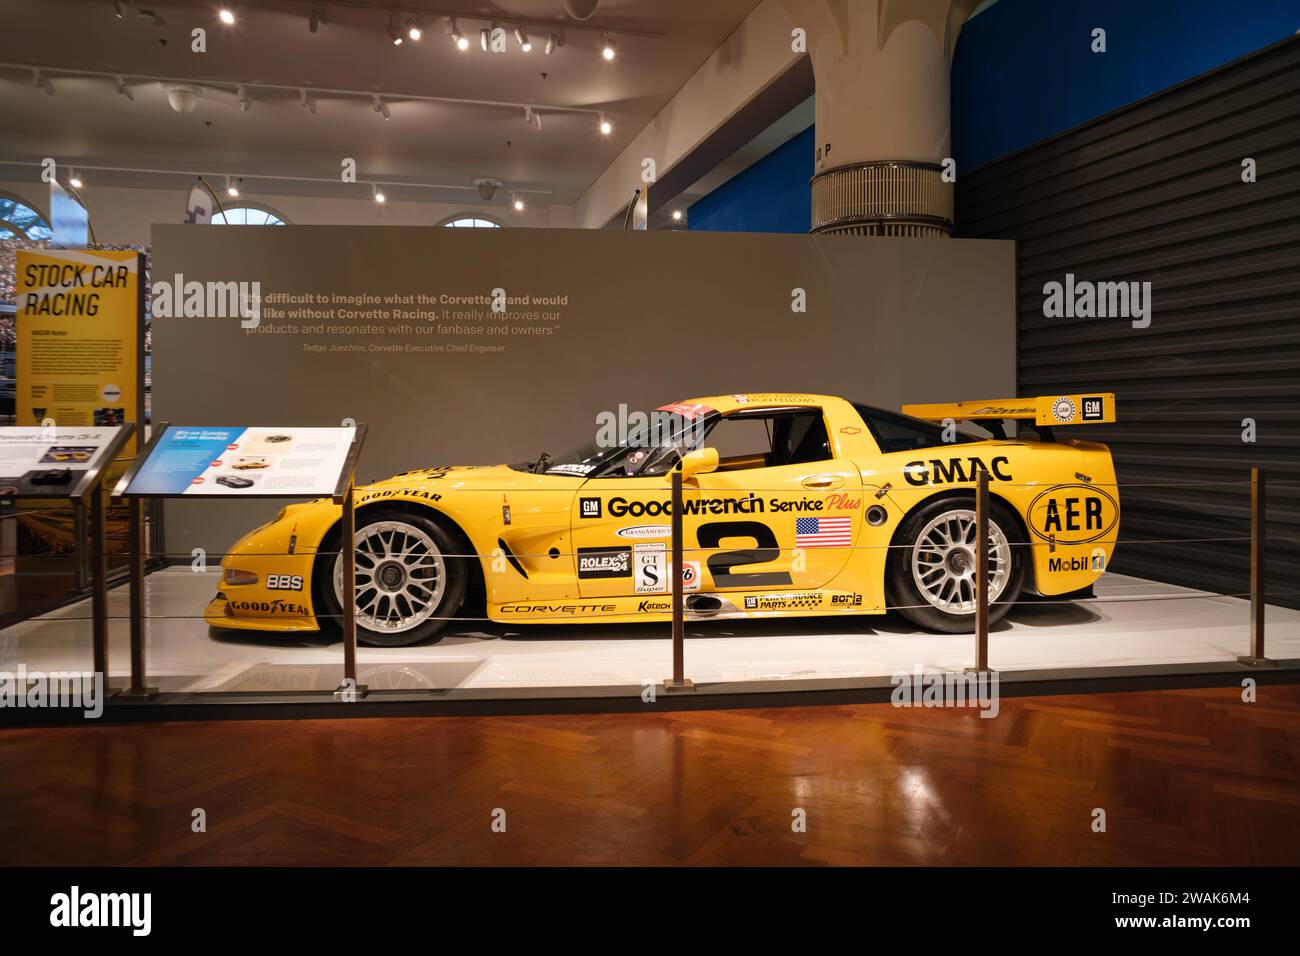 2001 Corvette C5-R race car on display at The Henry Ford Museum of American Innovation, Dearborn Michigan USA Stock Photo